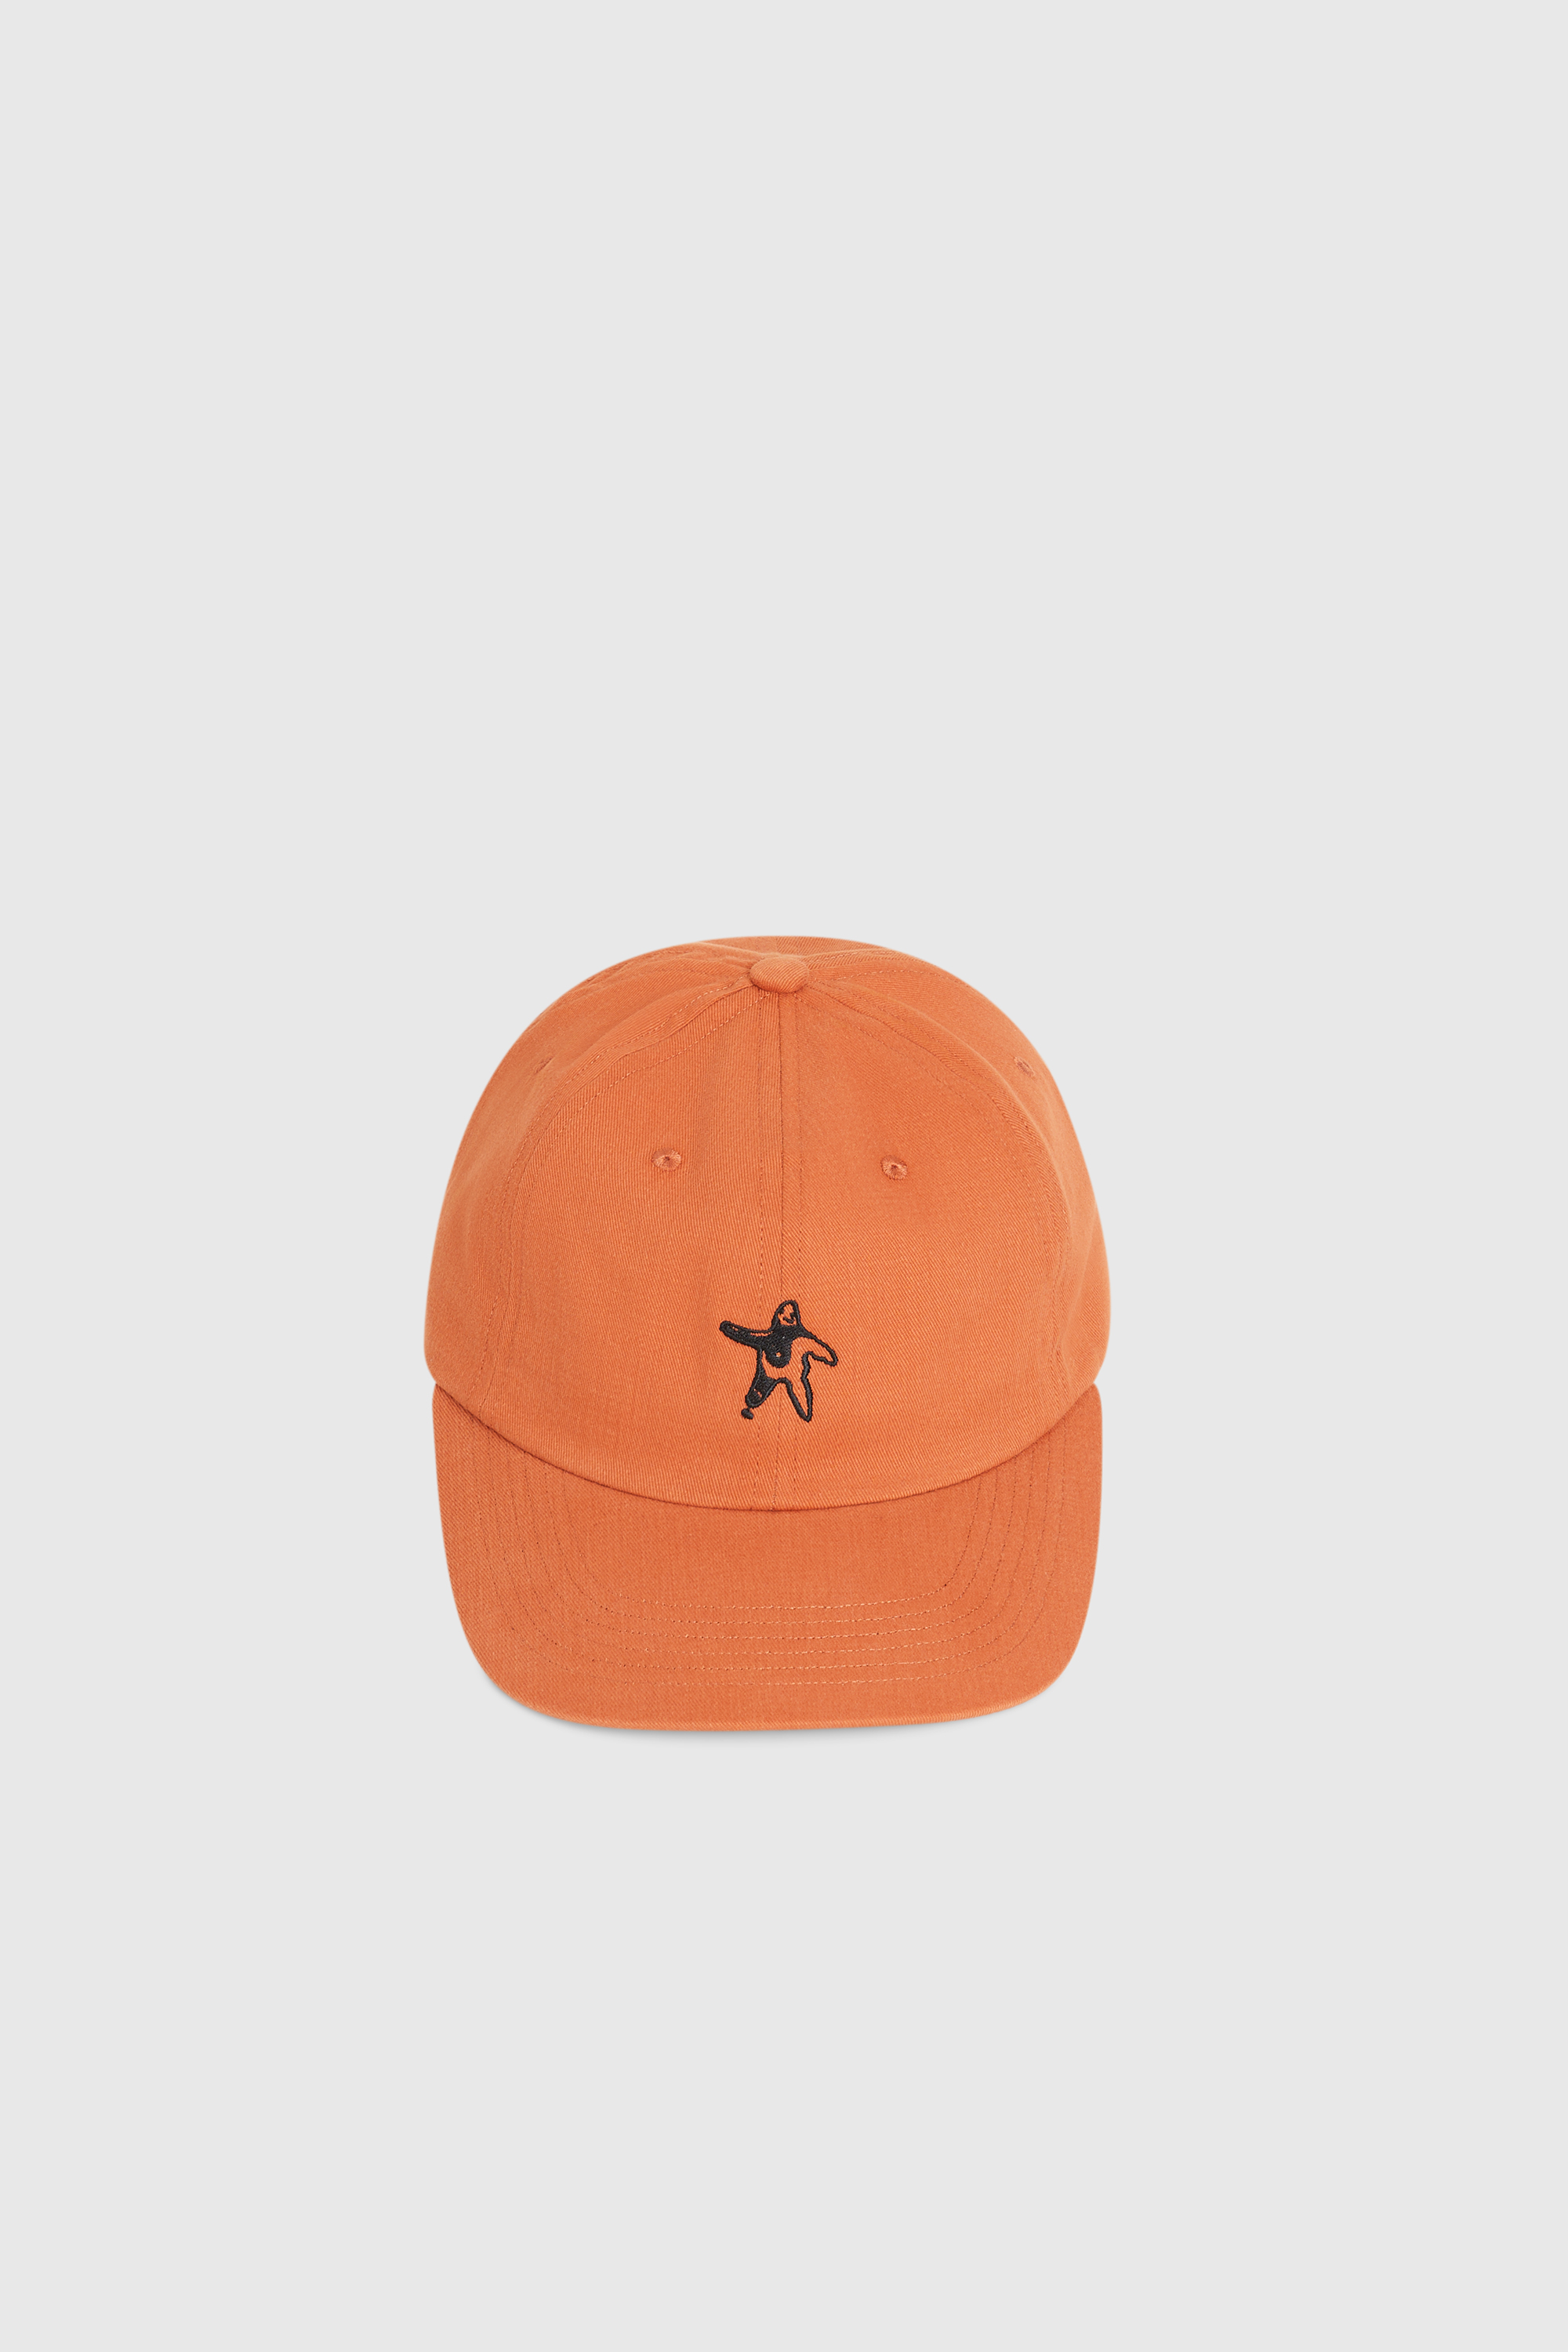 WTAPS JUNGLE 01 / HAT / NYCO.RIPSTOP Beige | WoodWood.com